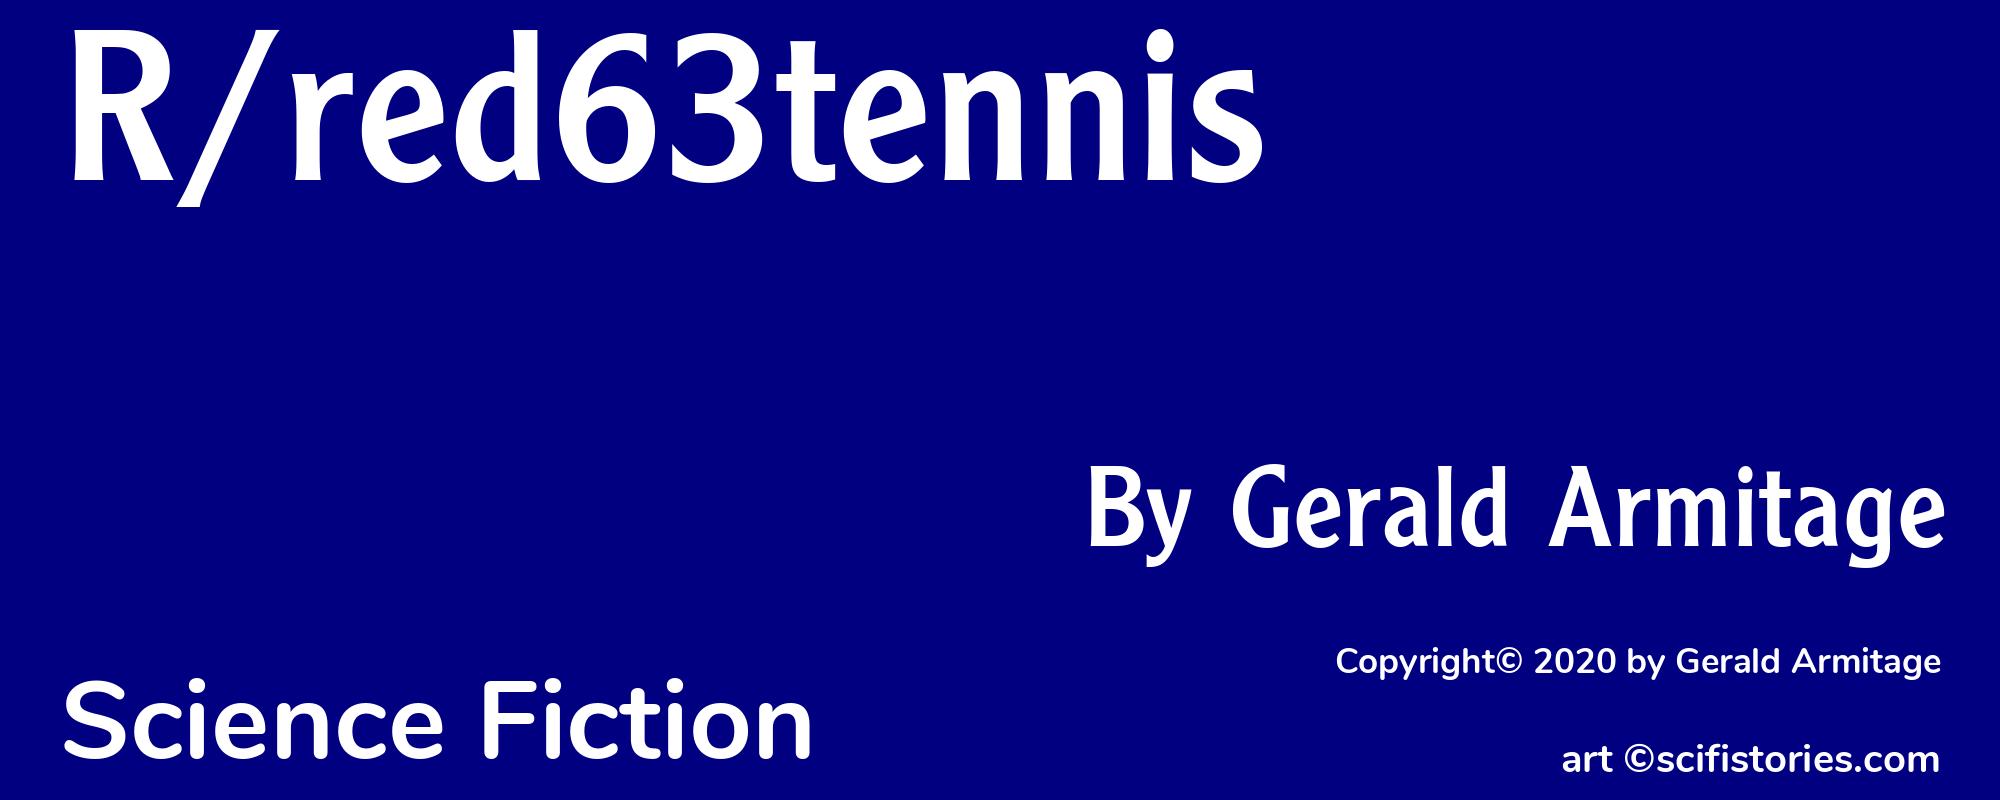 R/red63tennis - Cover